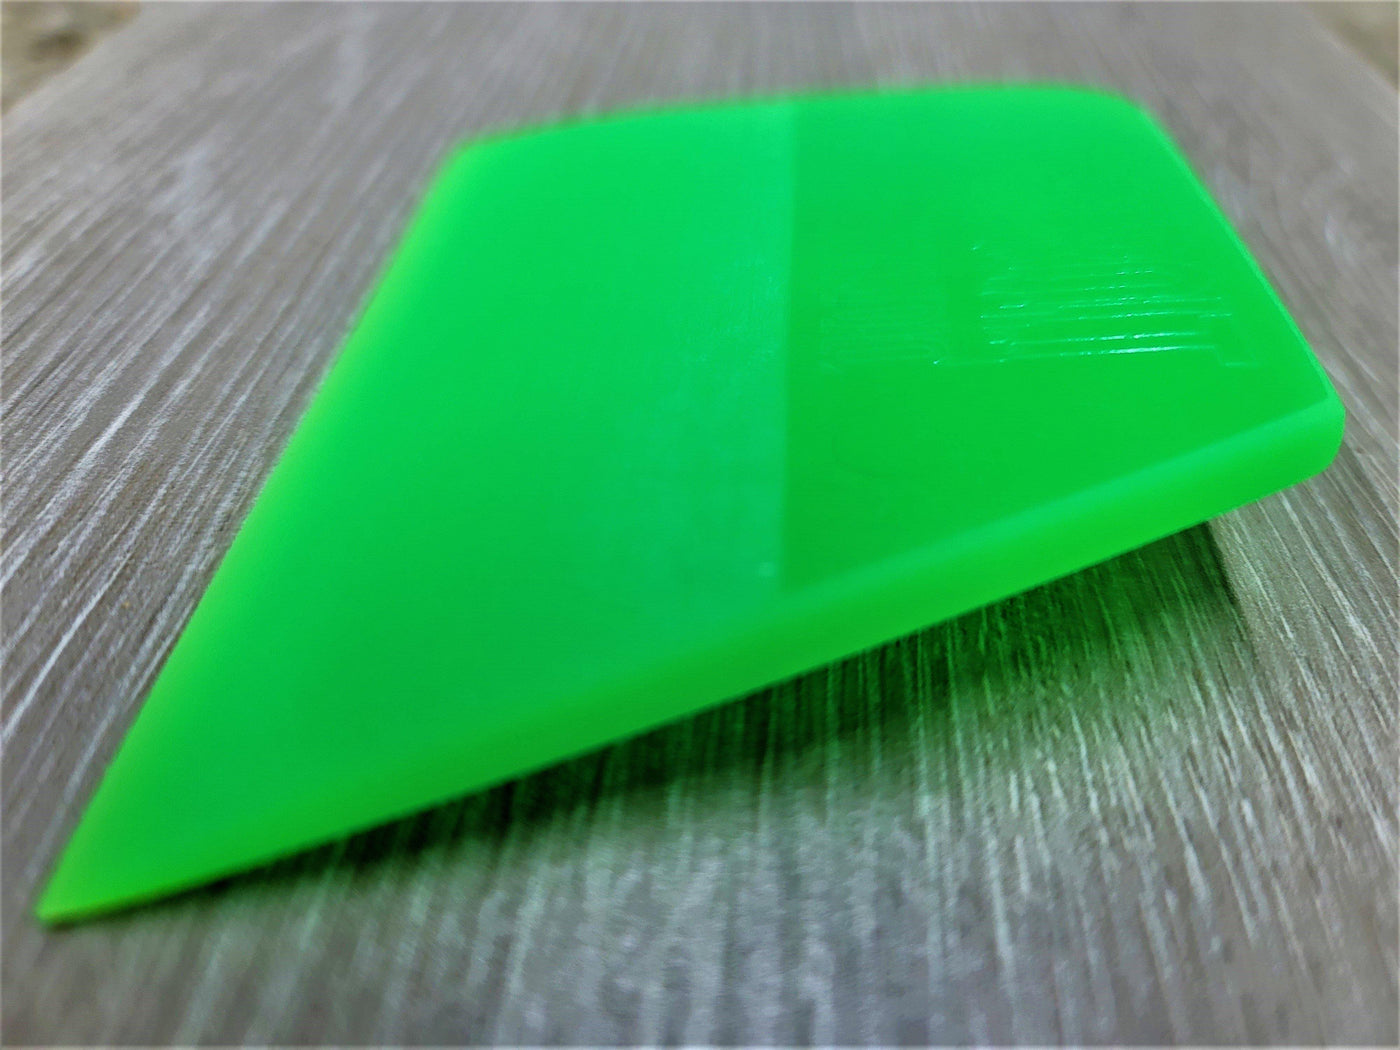 MINI QUARTER WINDOW SQUEEGEE: The Ultimate Tool for Quarter Glass Wind –  Window Tint Supplies